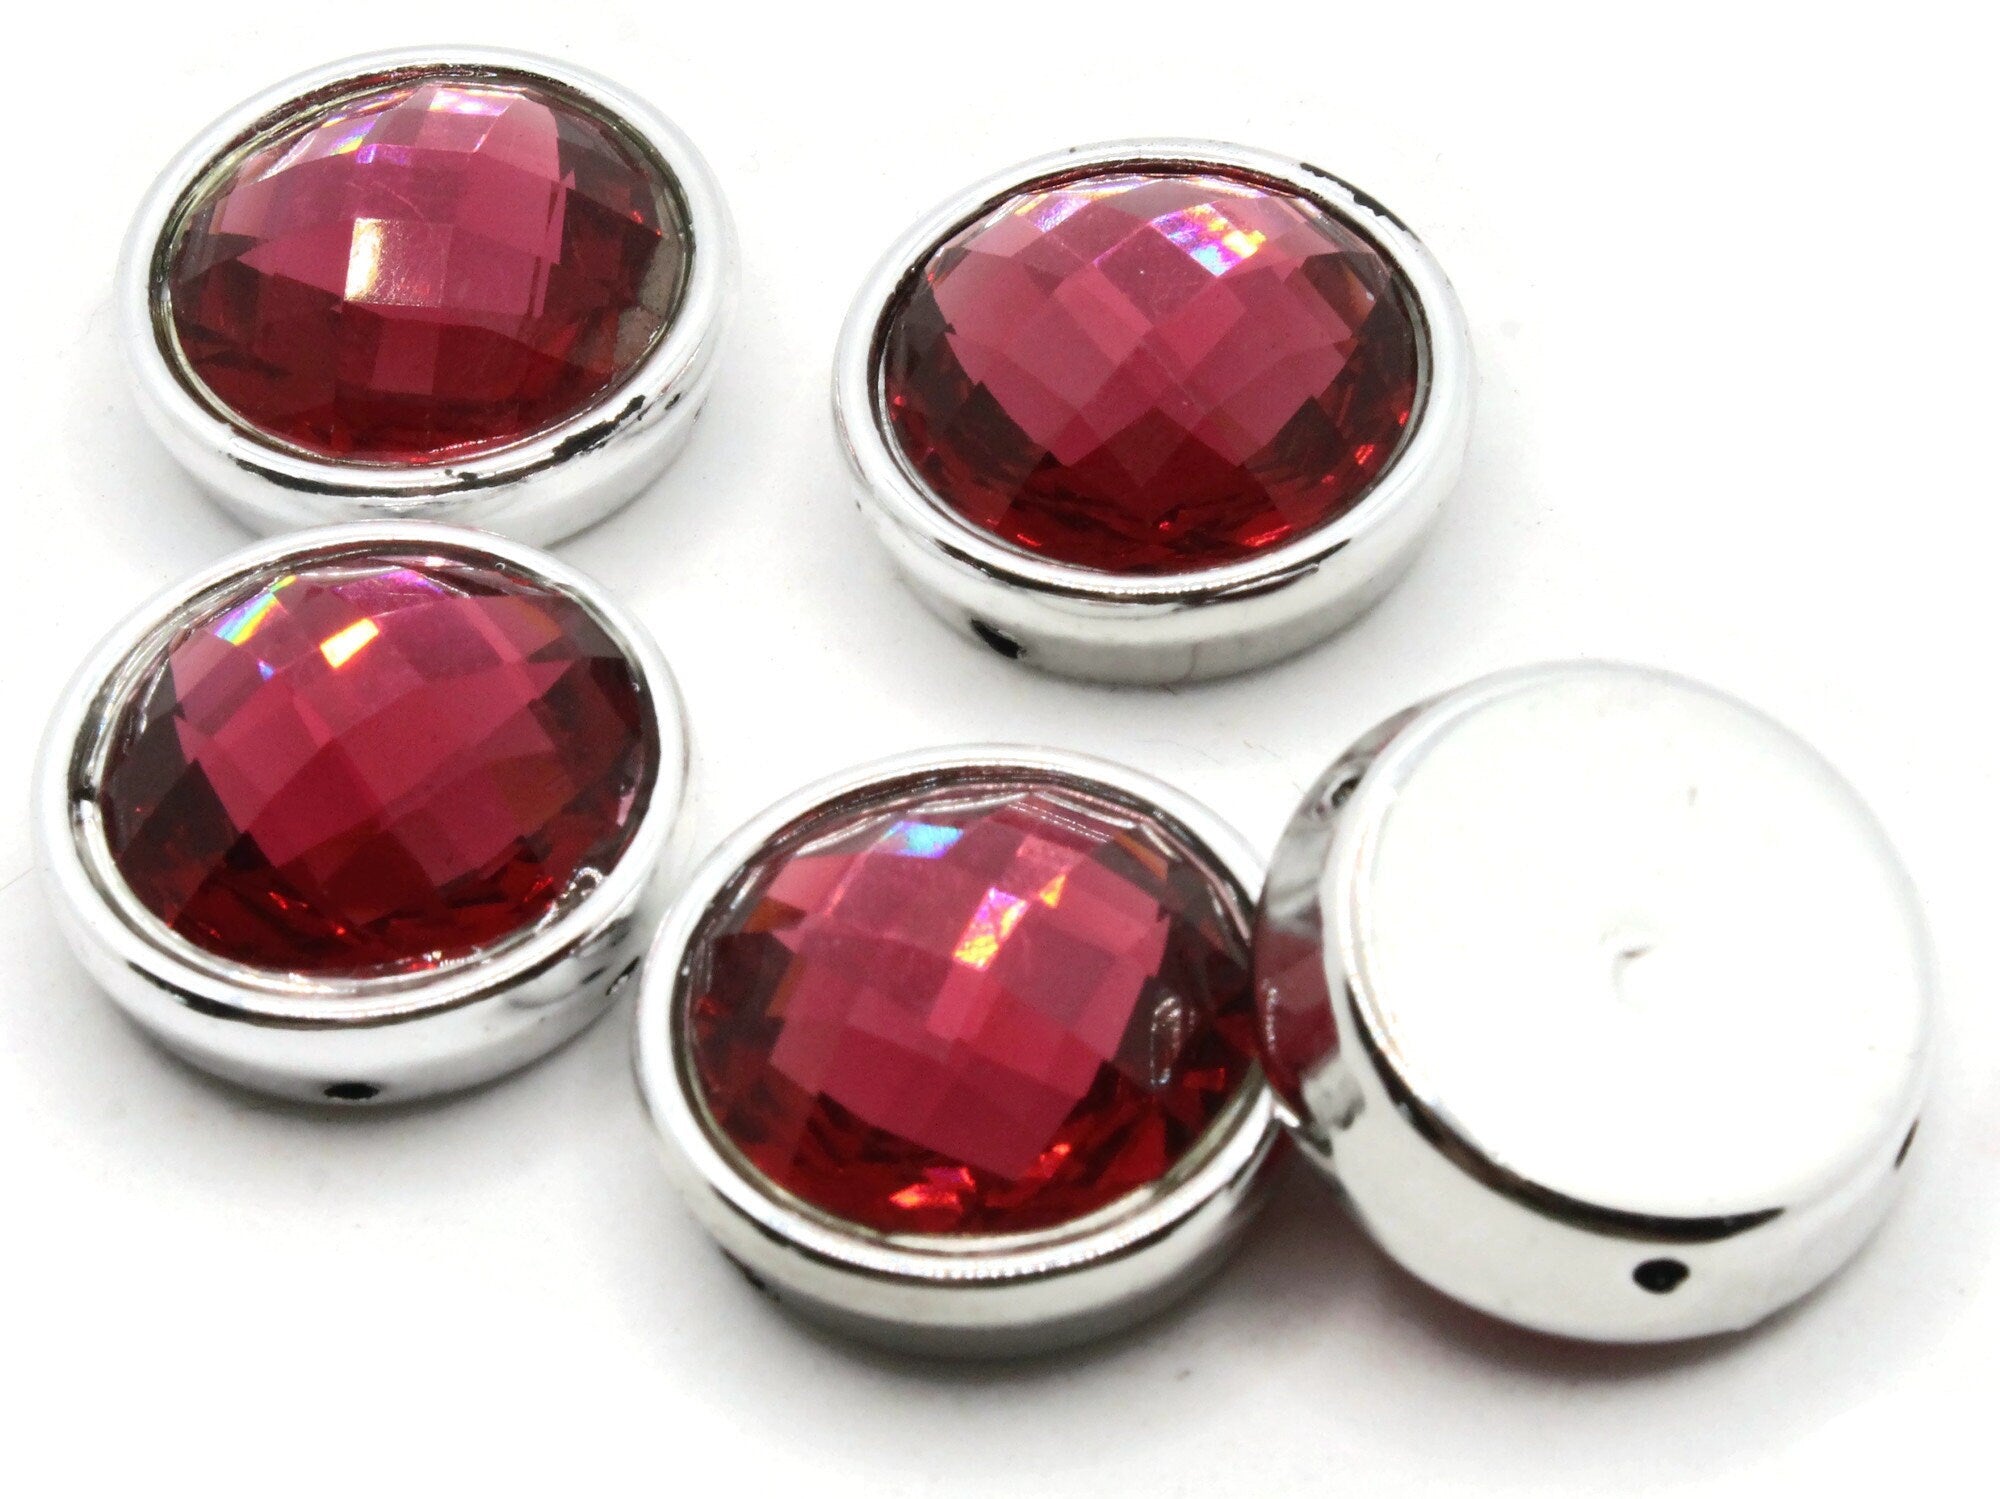 5 24mm Pink Gems with Silver Frames Faceted Acrylic Jewels Two Hole Beads by Smileyboy Beads | Michaels